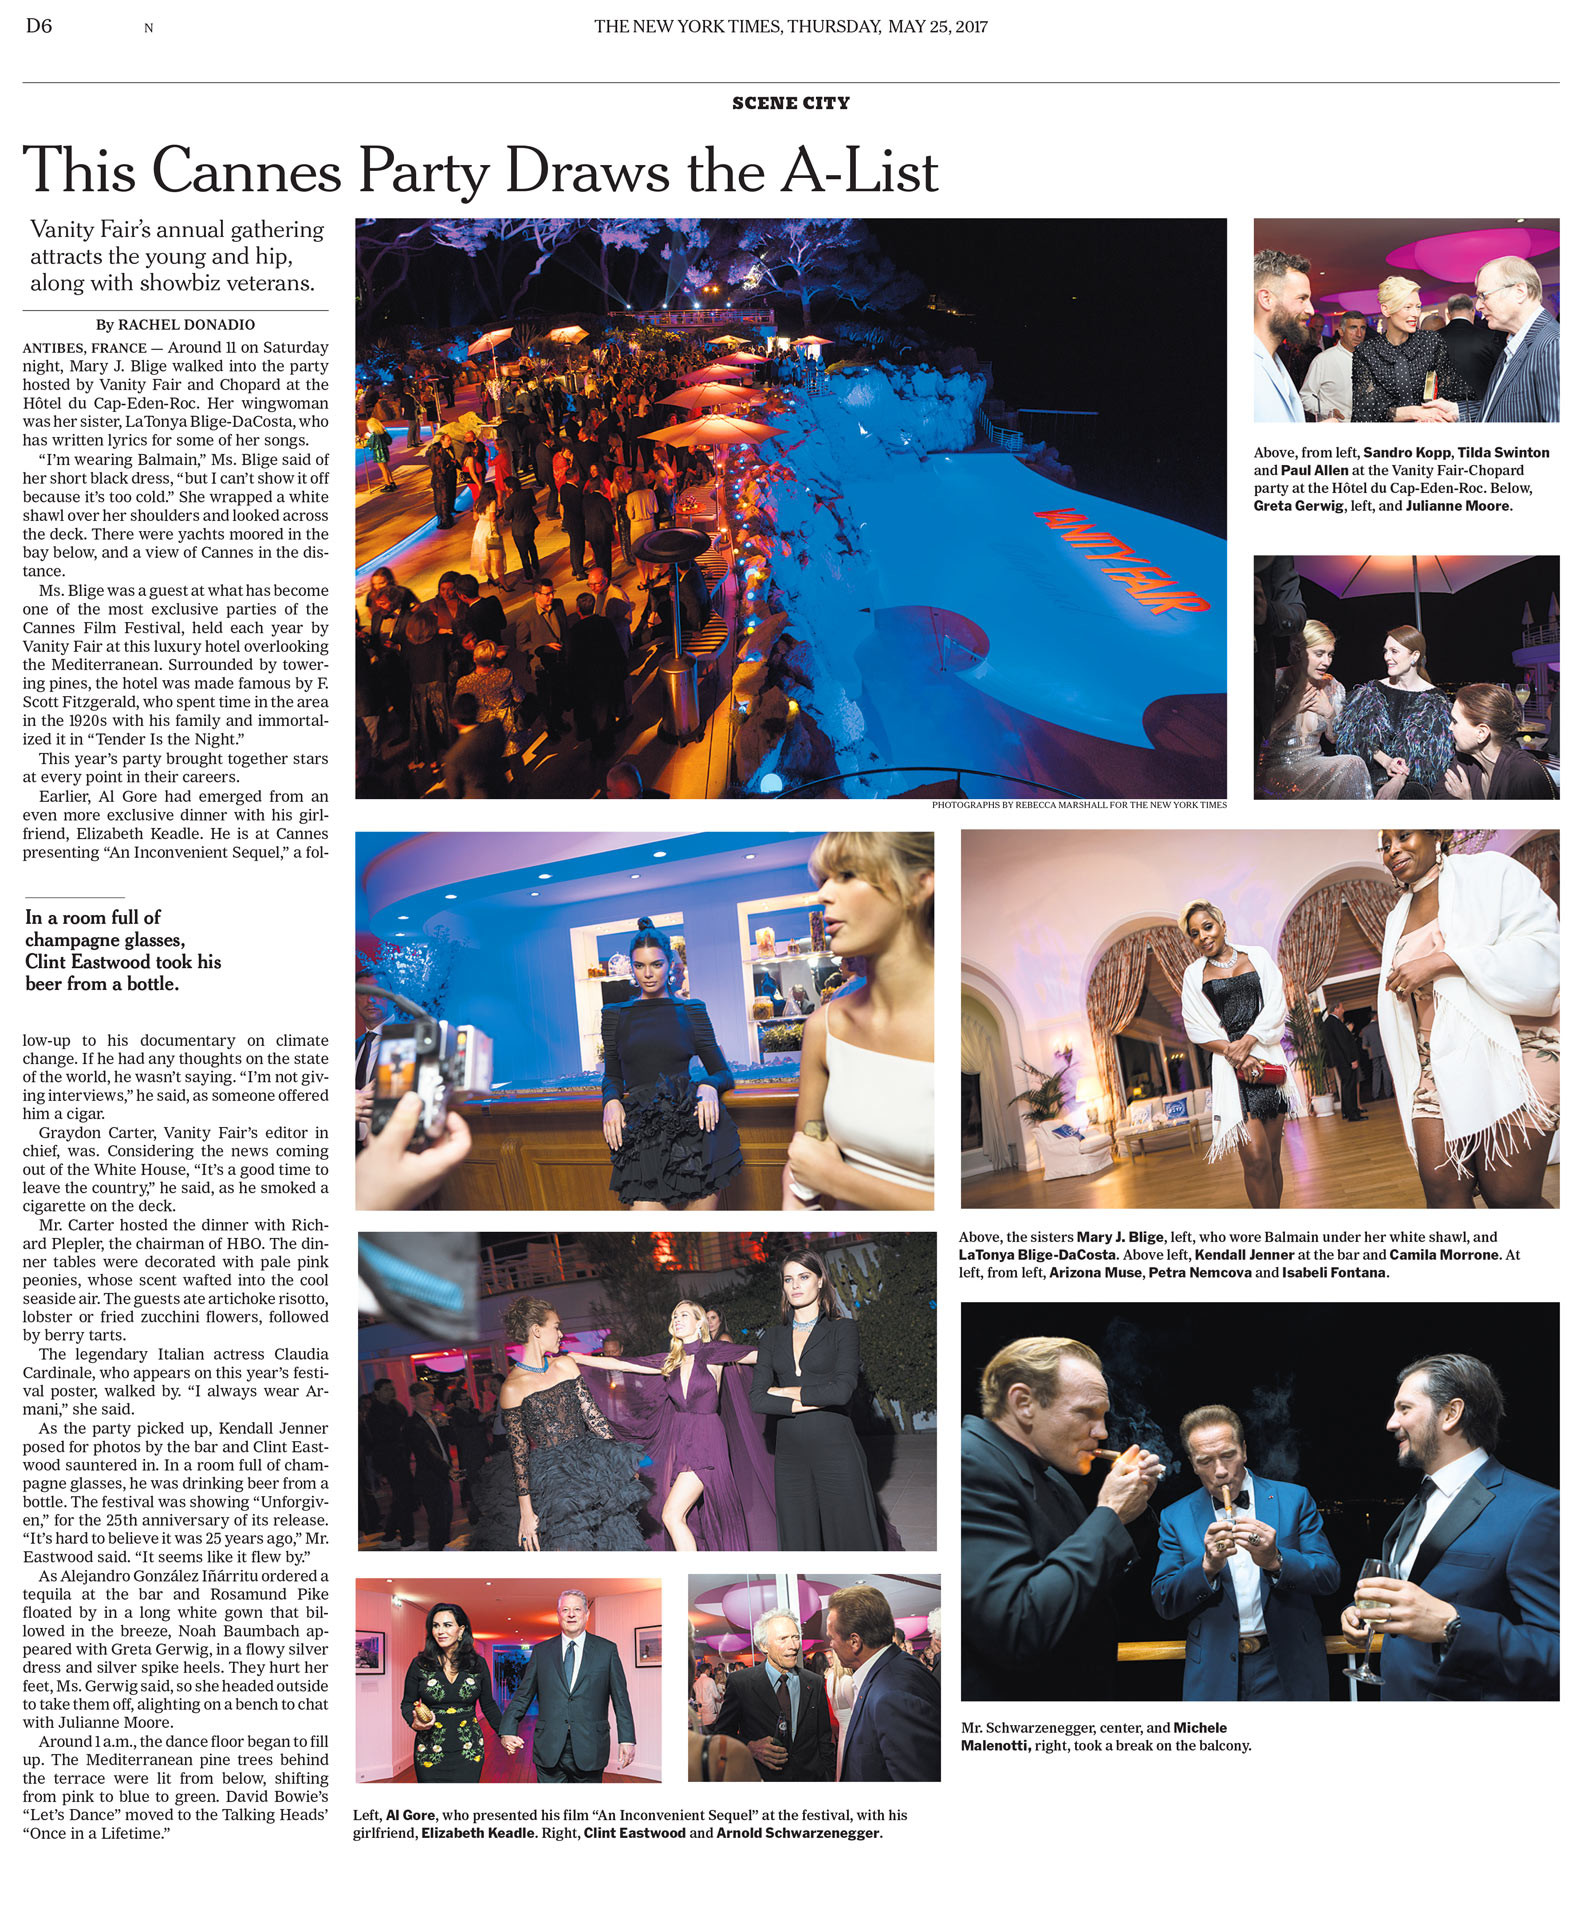 Page from the New York Times newspaper showing a mix of party photos and text